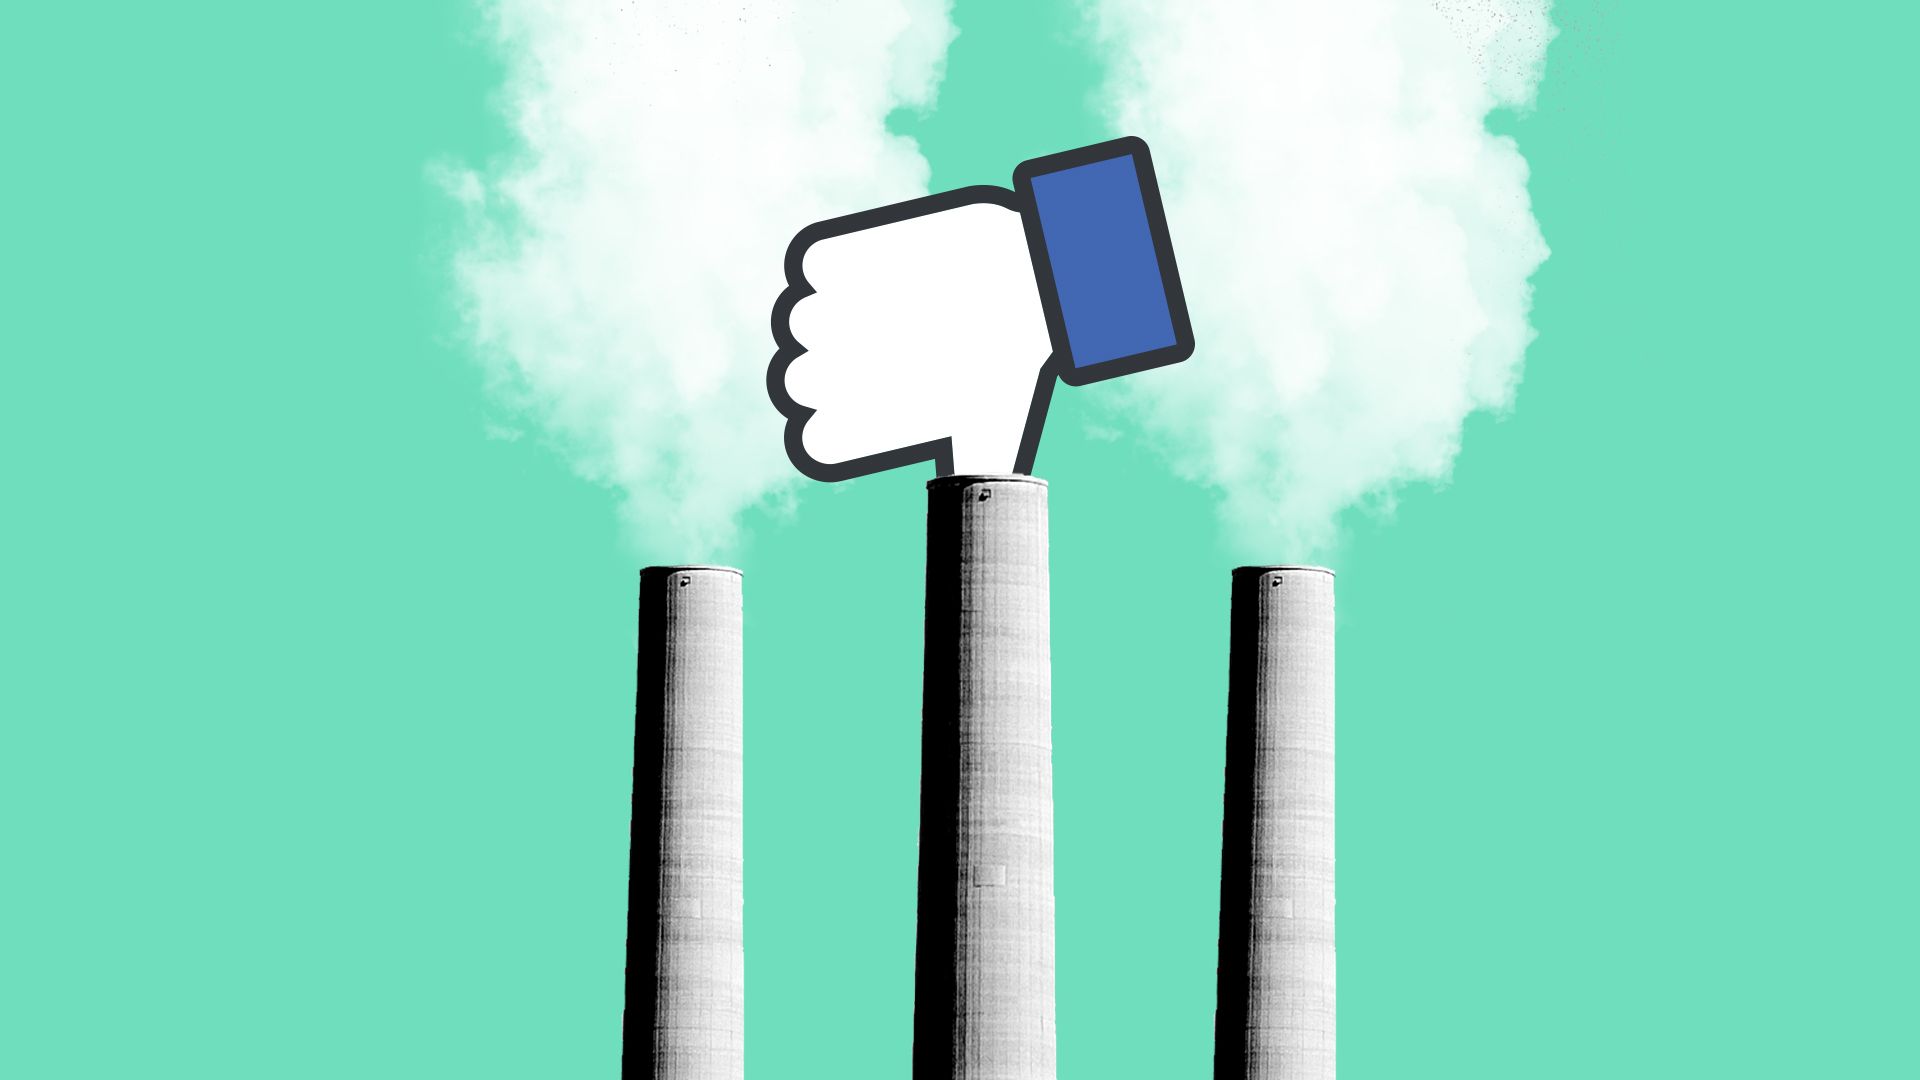 Illustration for story on Facebook and renewables